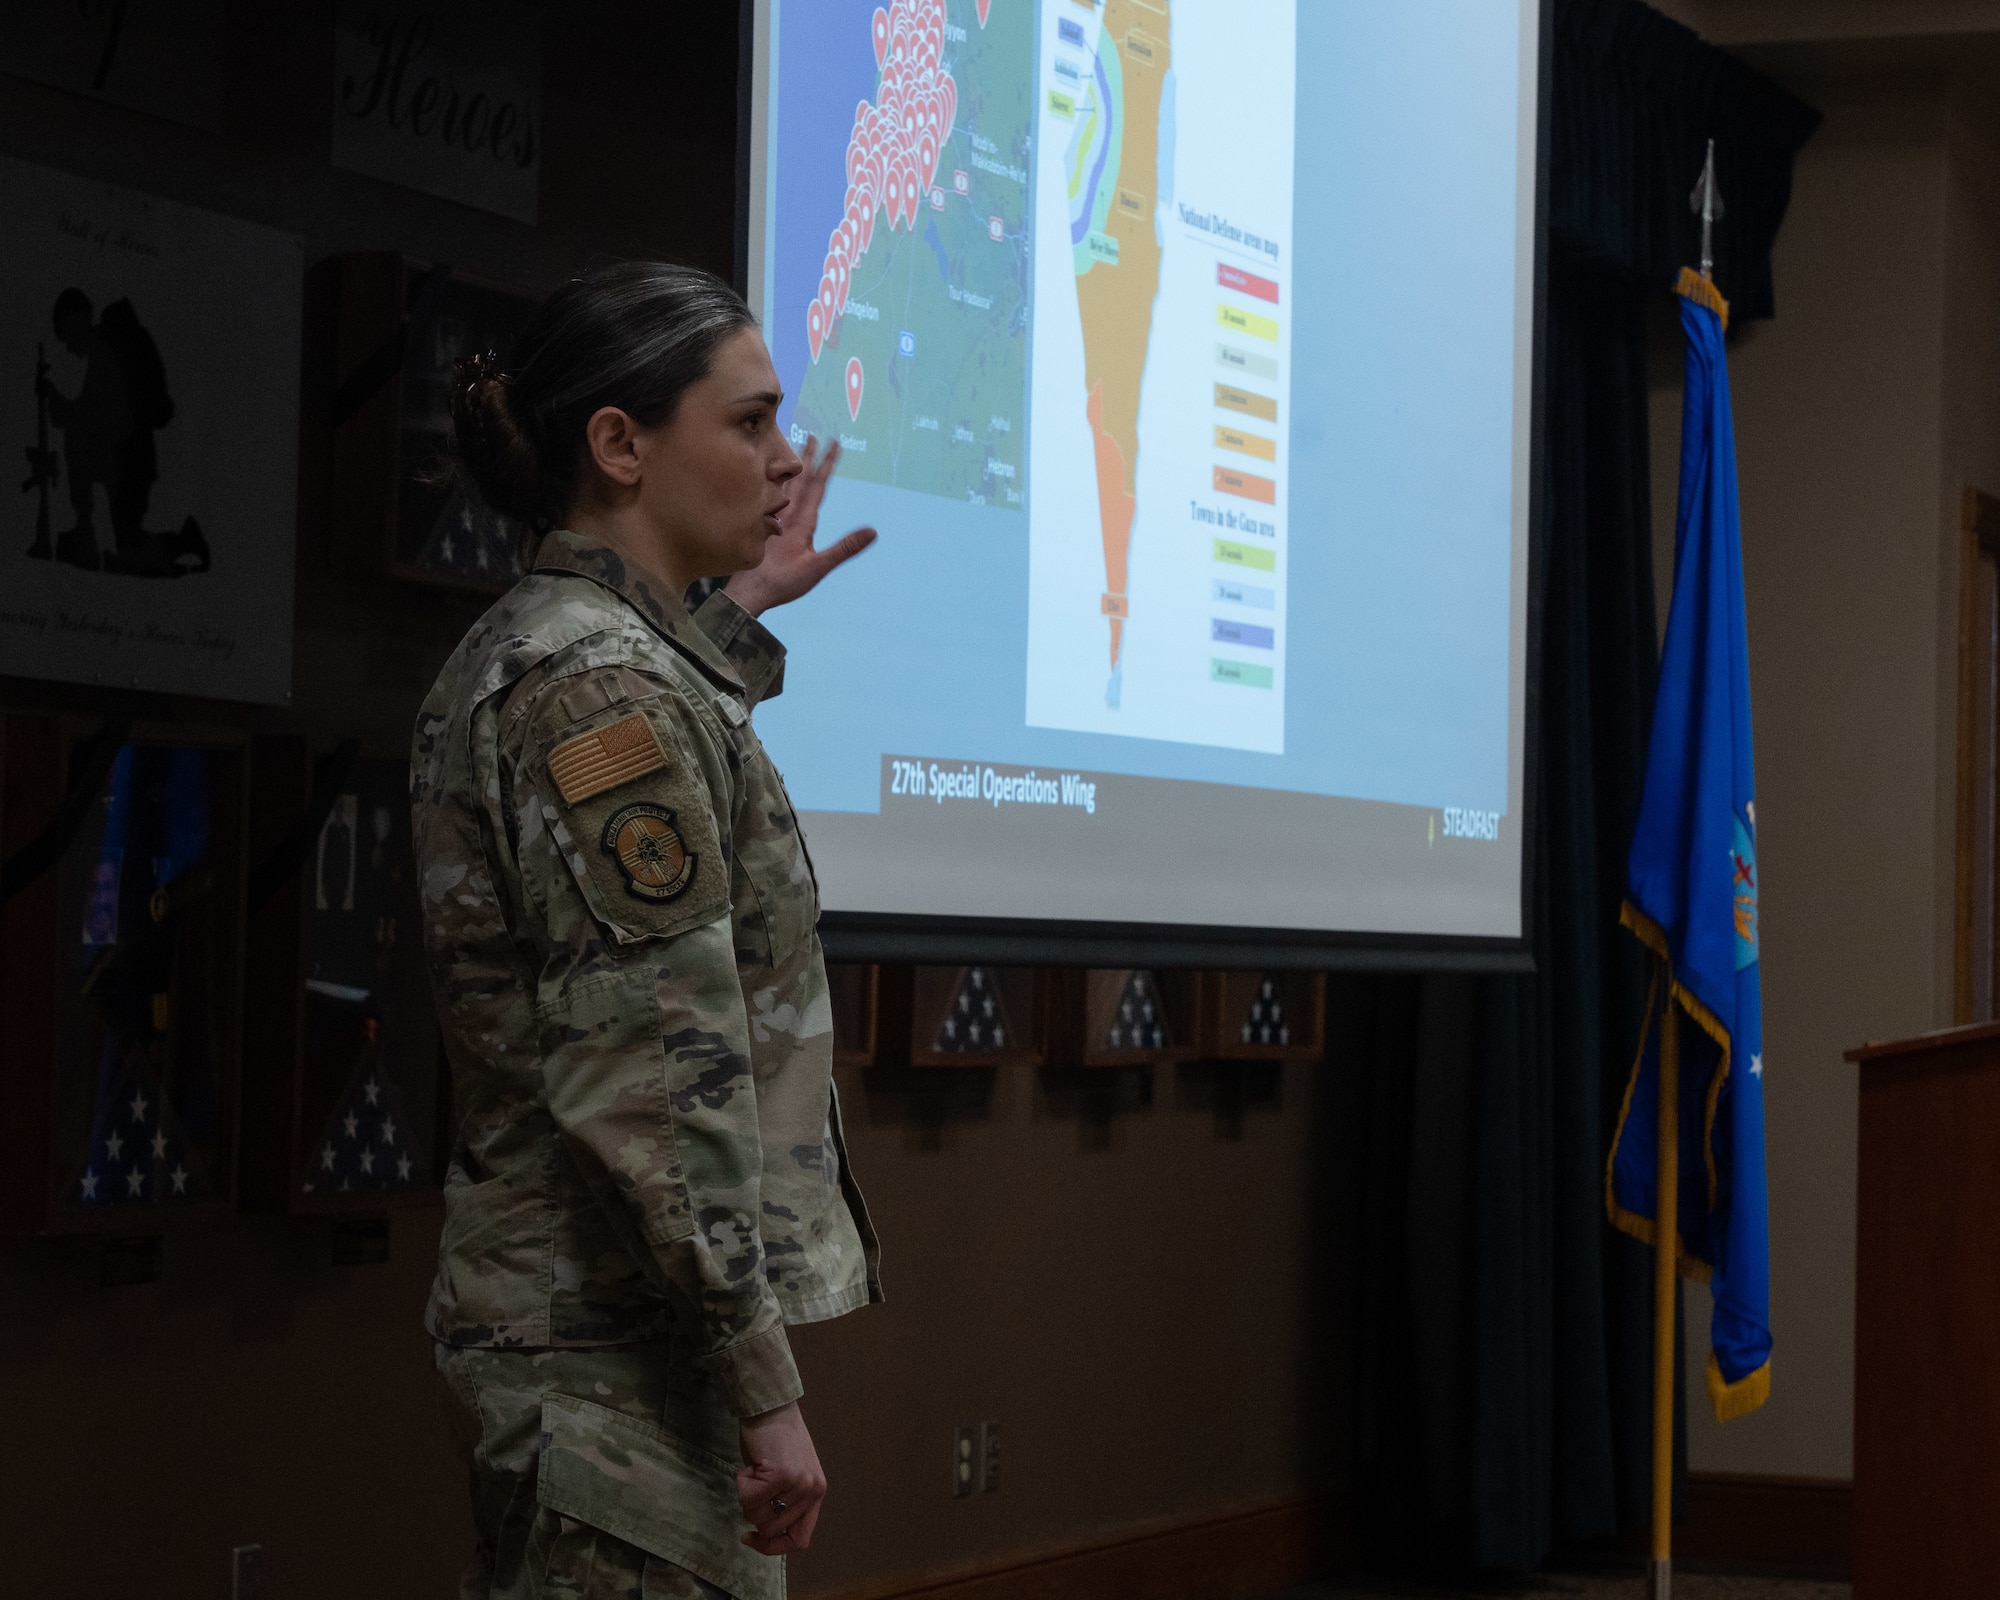 U.S Air Force 1st Lt. Erika Smith, assigned to the
27th Special Operations Mission Support Group,
recounts her past experiences in a presentation at
Cannon Air Force Base, N.M., March 22, 2024.
The BCC provides the opportunity to open the
door on a wide range of topics with senior Air
Force leaders, continuing the strong tradition of
community involvement and support here. (U.S Air Force Photo by Senior Airman Mateo Parra)